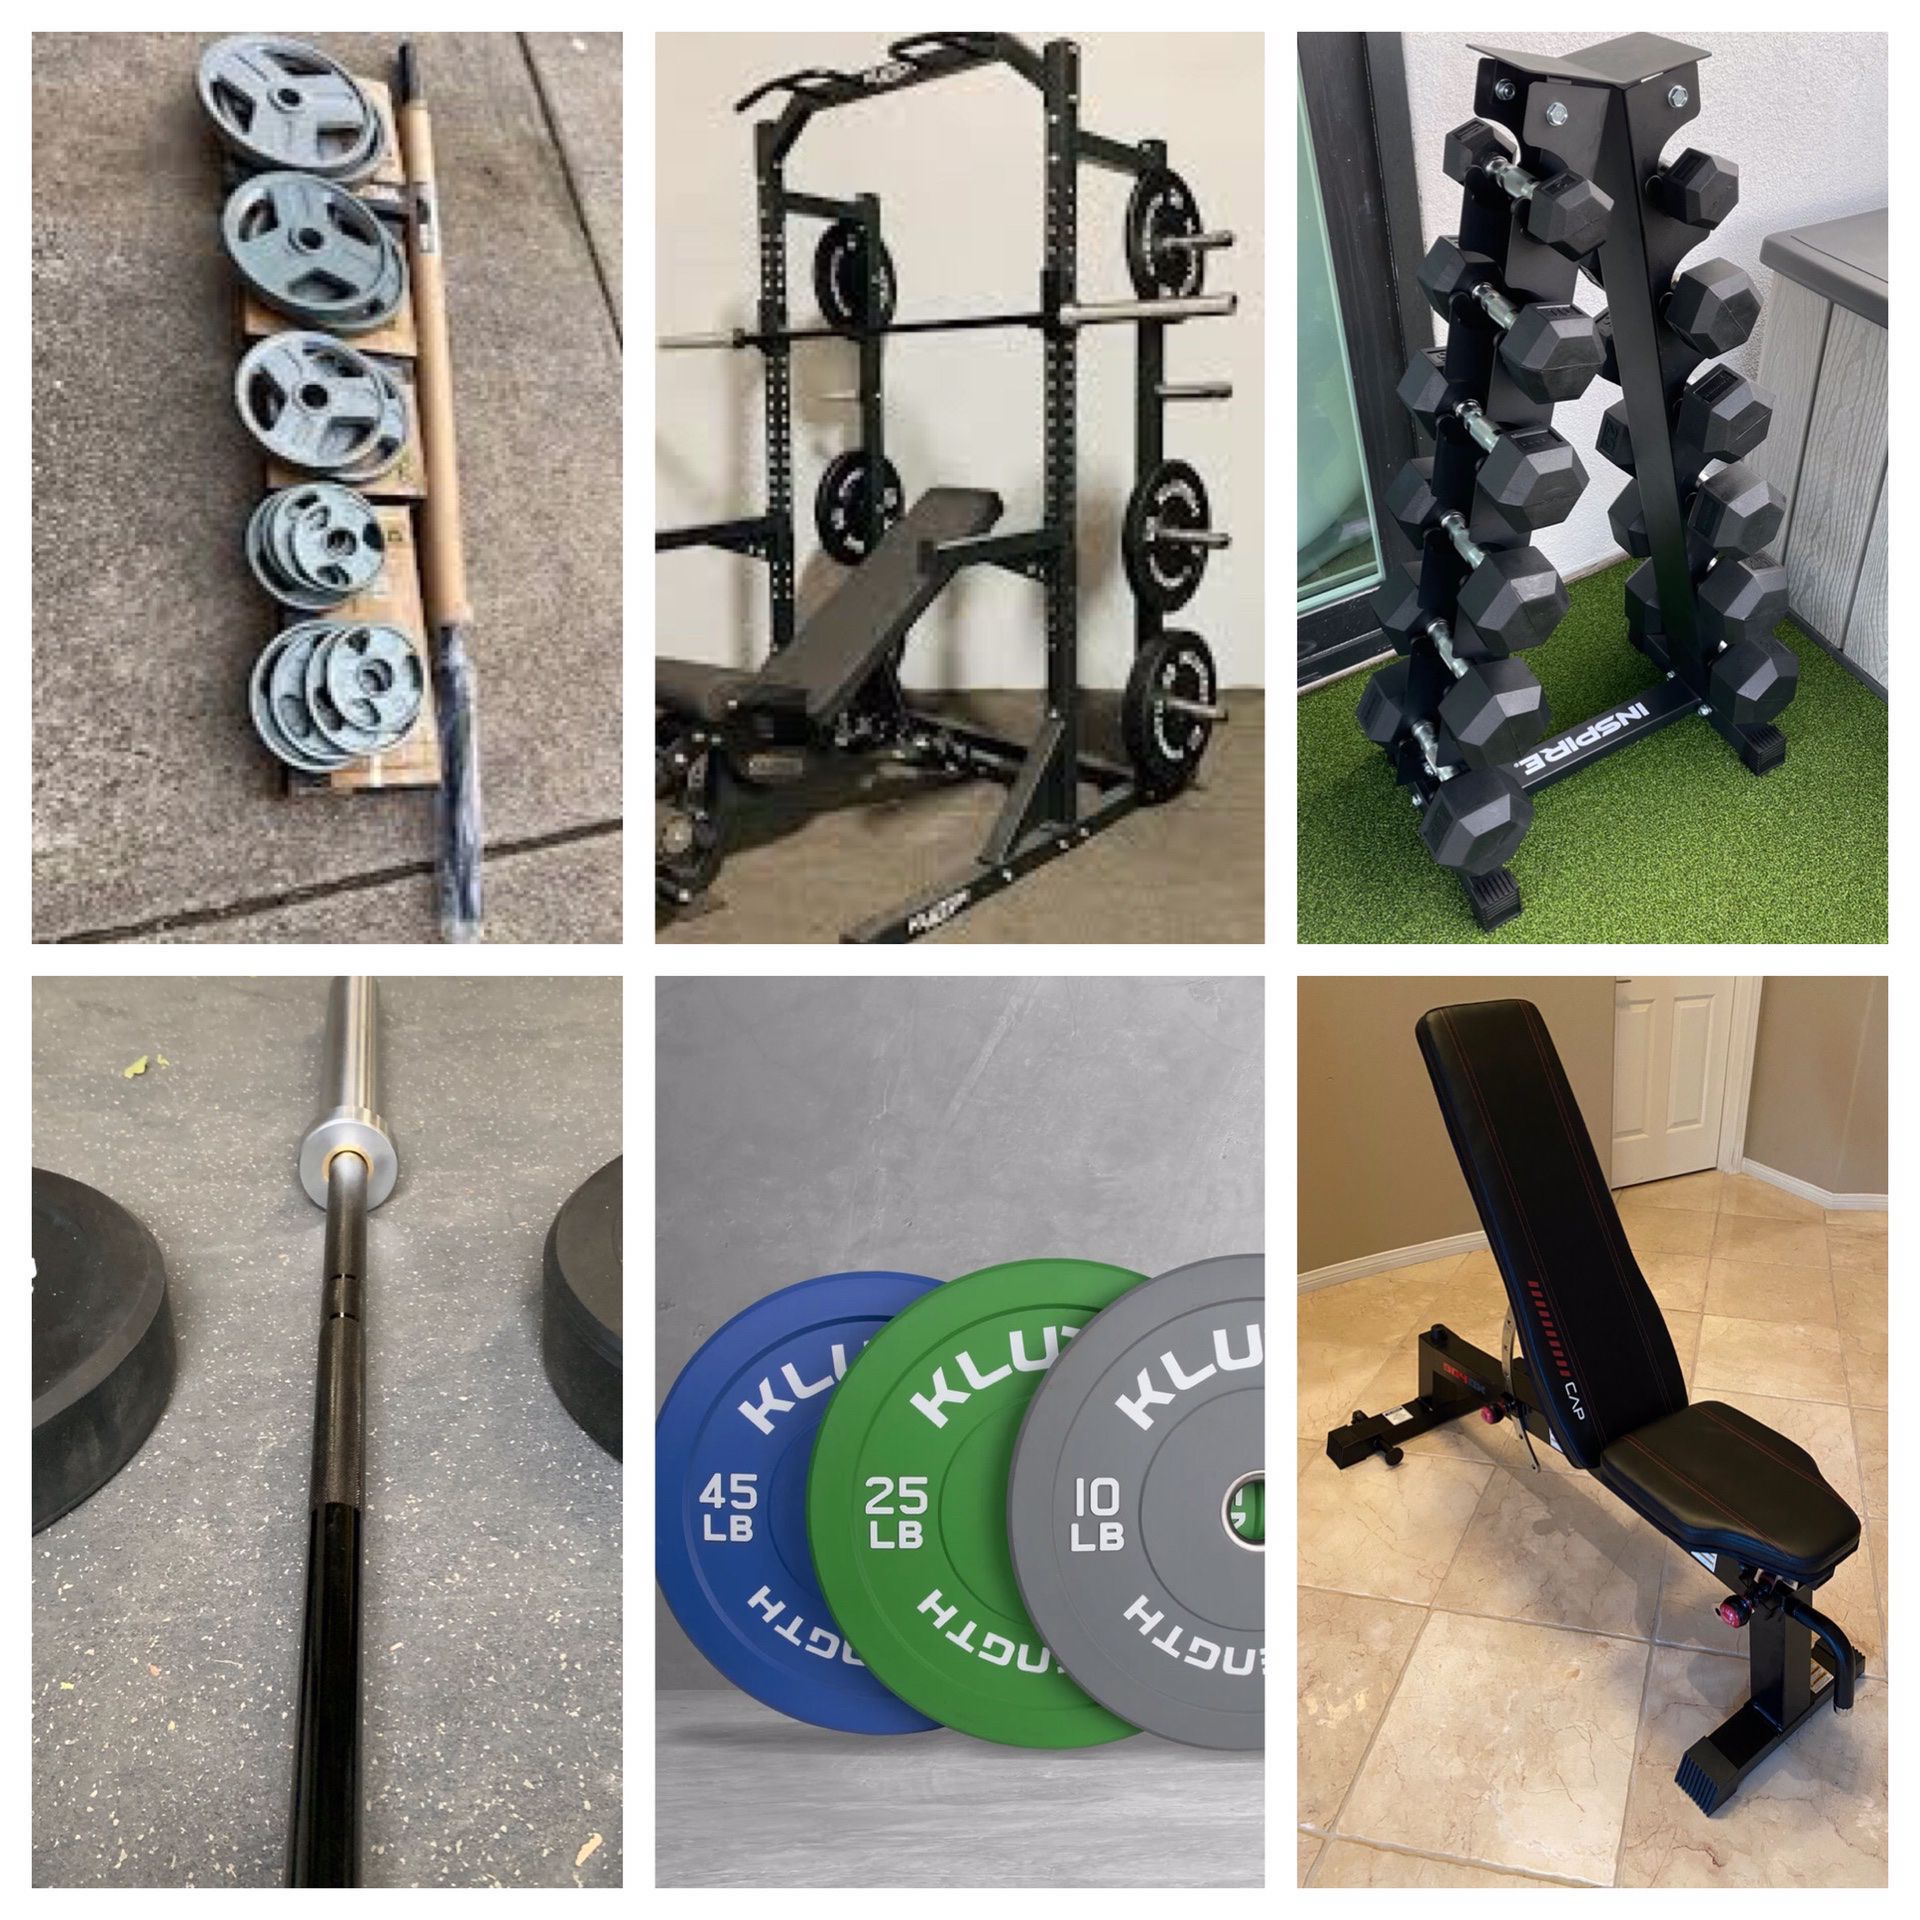 BRAND NEW GYM EQUIPMENT FOR SALE - MESSAGE ME FOR INDIVIDUAL PRICES - Please Read Description And Check Out All The Pictures! xxzmms